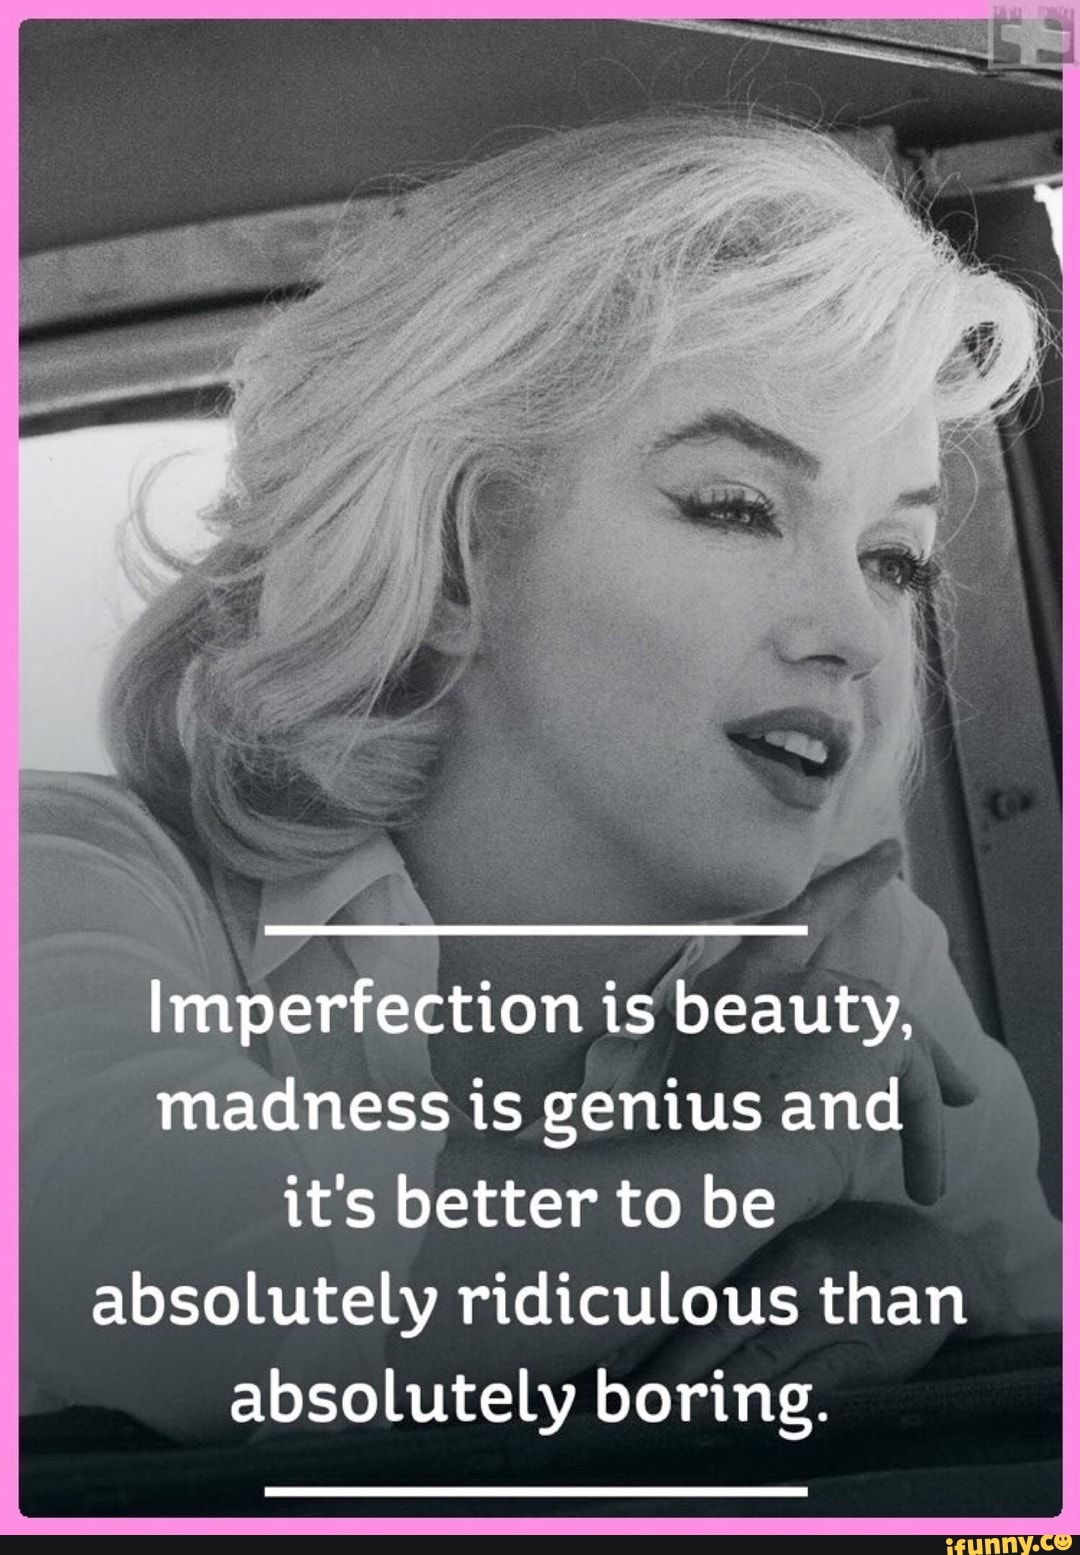 Is genius and it's better to be absolutely ridiculous than absolutely ...